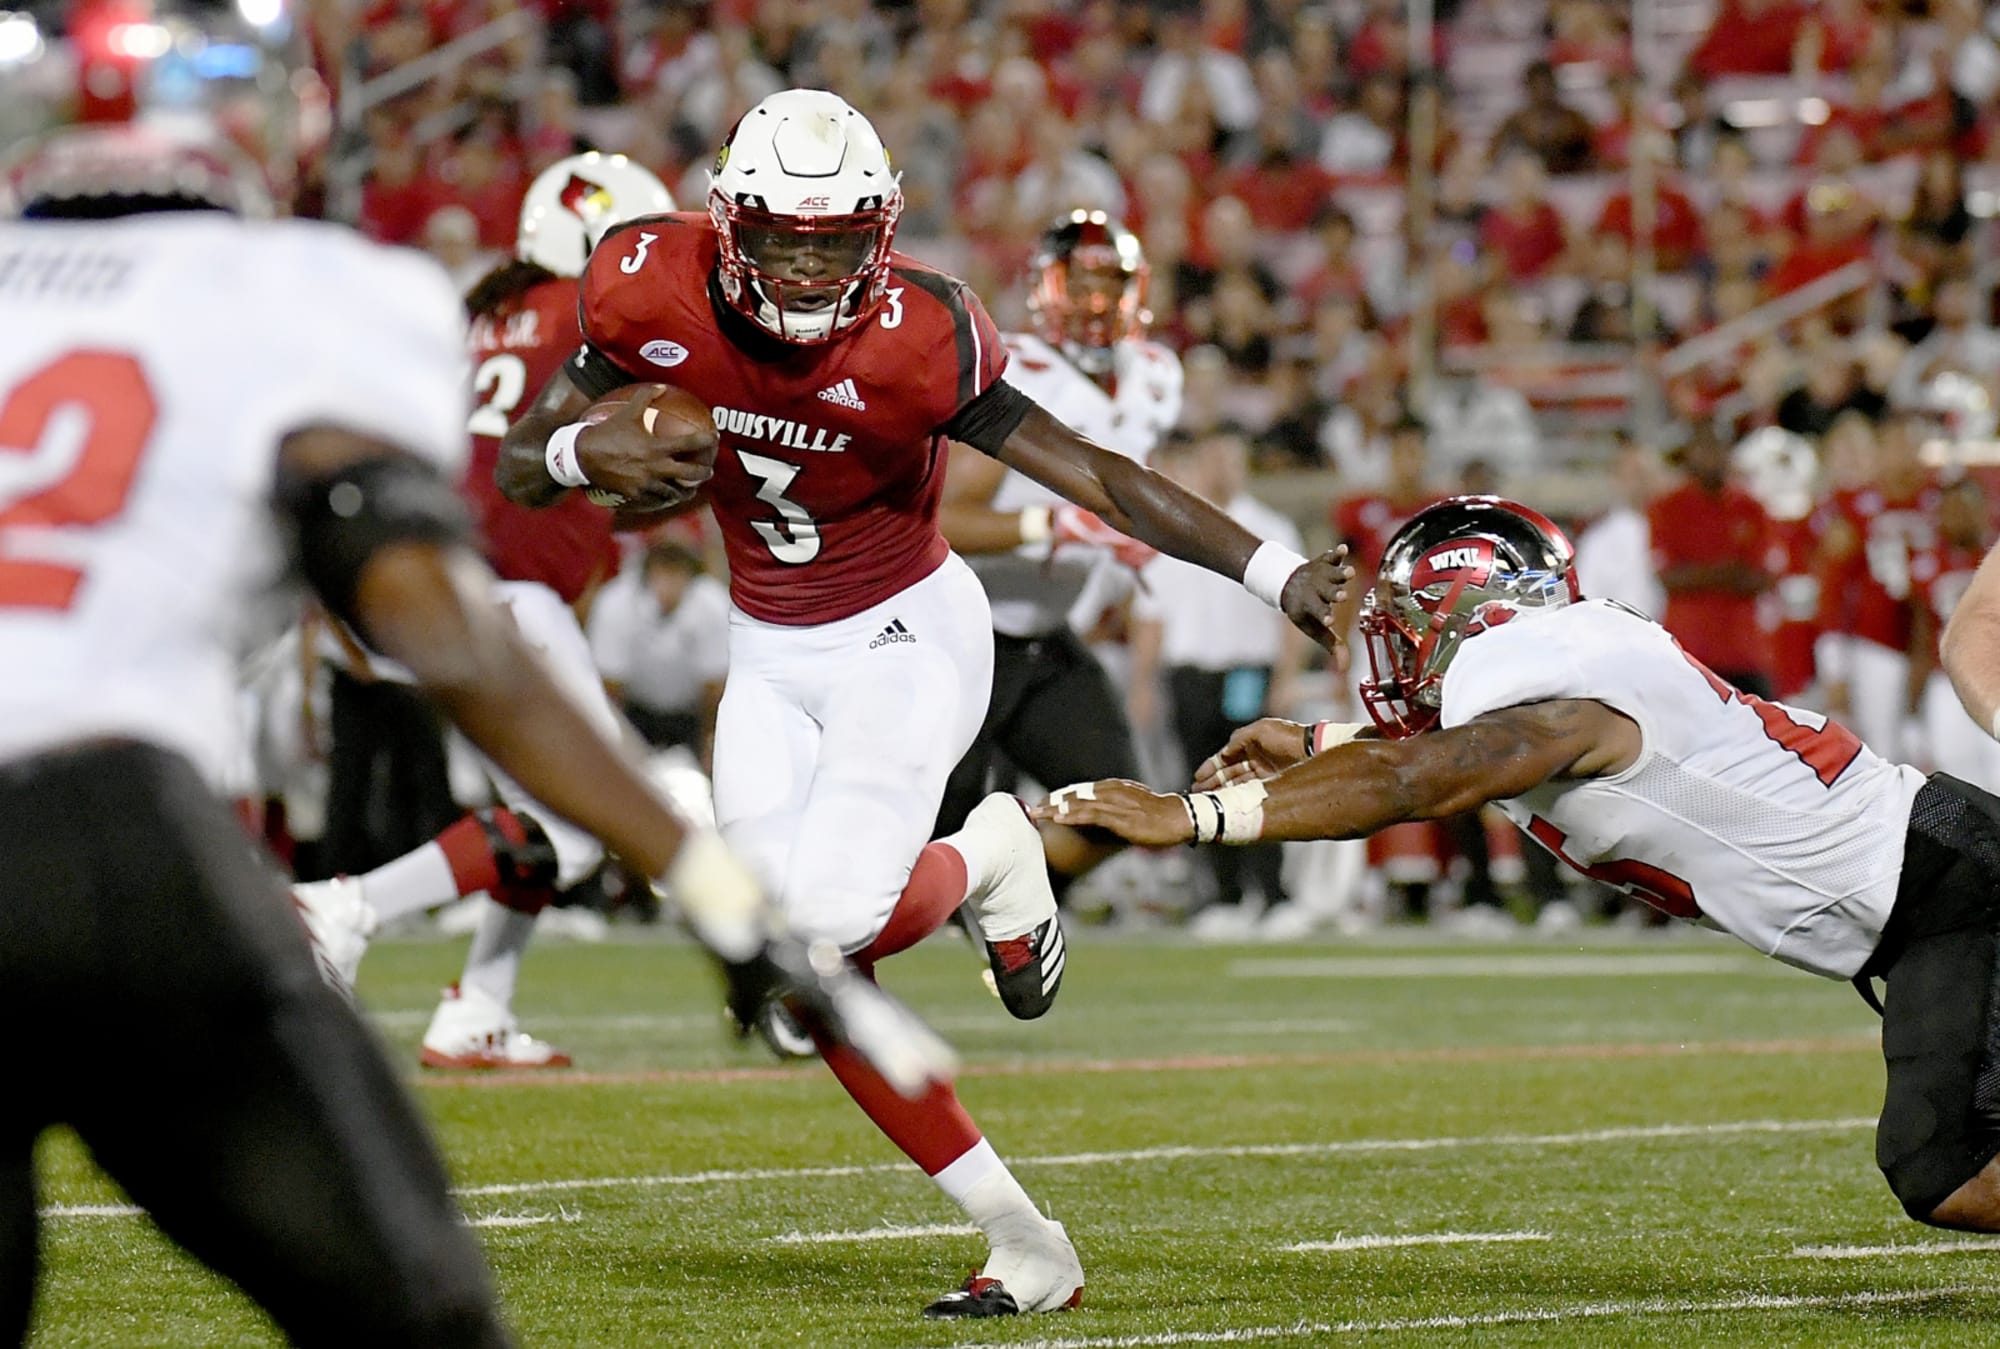 Louisville football: 3 locks and 3 bold predictions for Cards against WKU